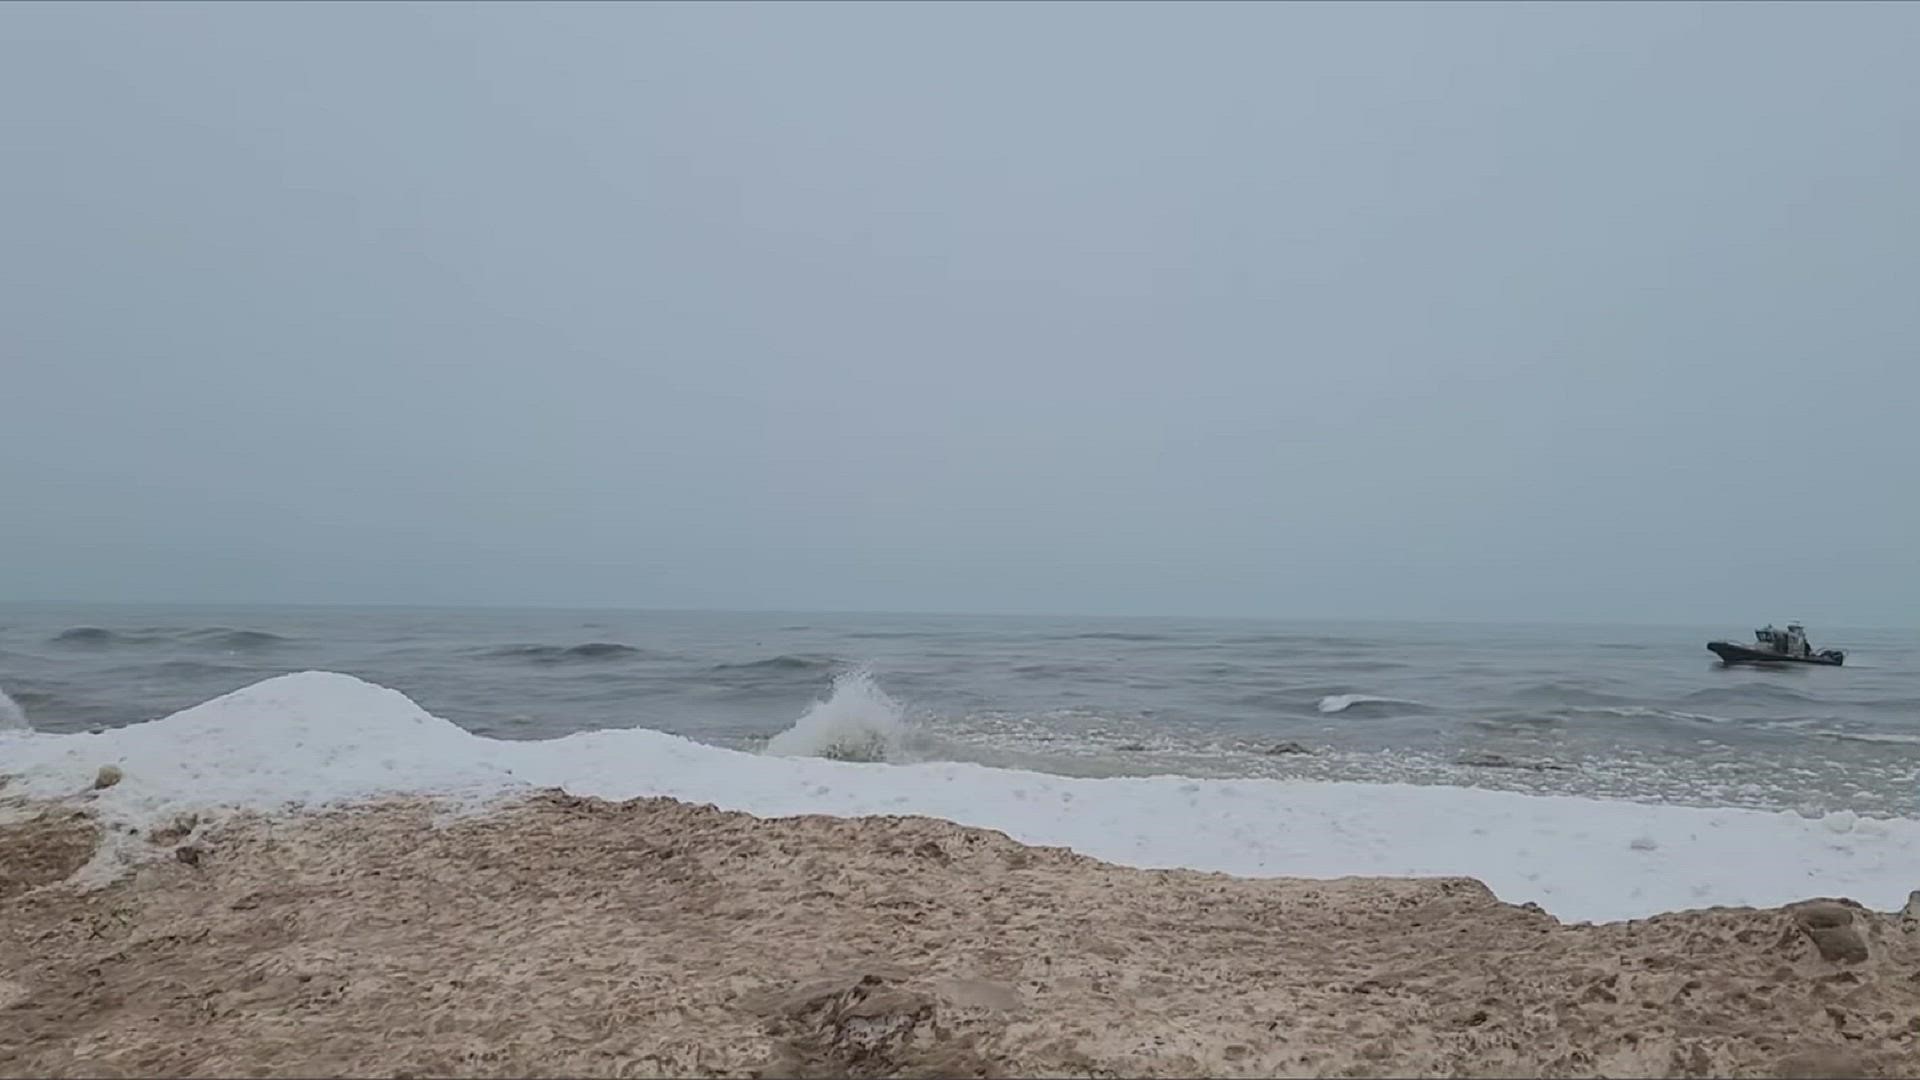 First responders spend Monday night and Tuesday searching for an Indianapolis man who fell through shelf ice on Lake Michigan at Indiana Dunes National Park.